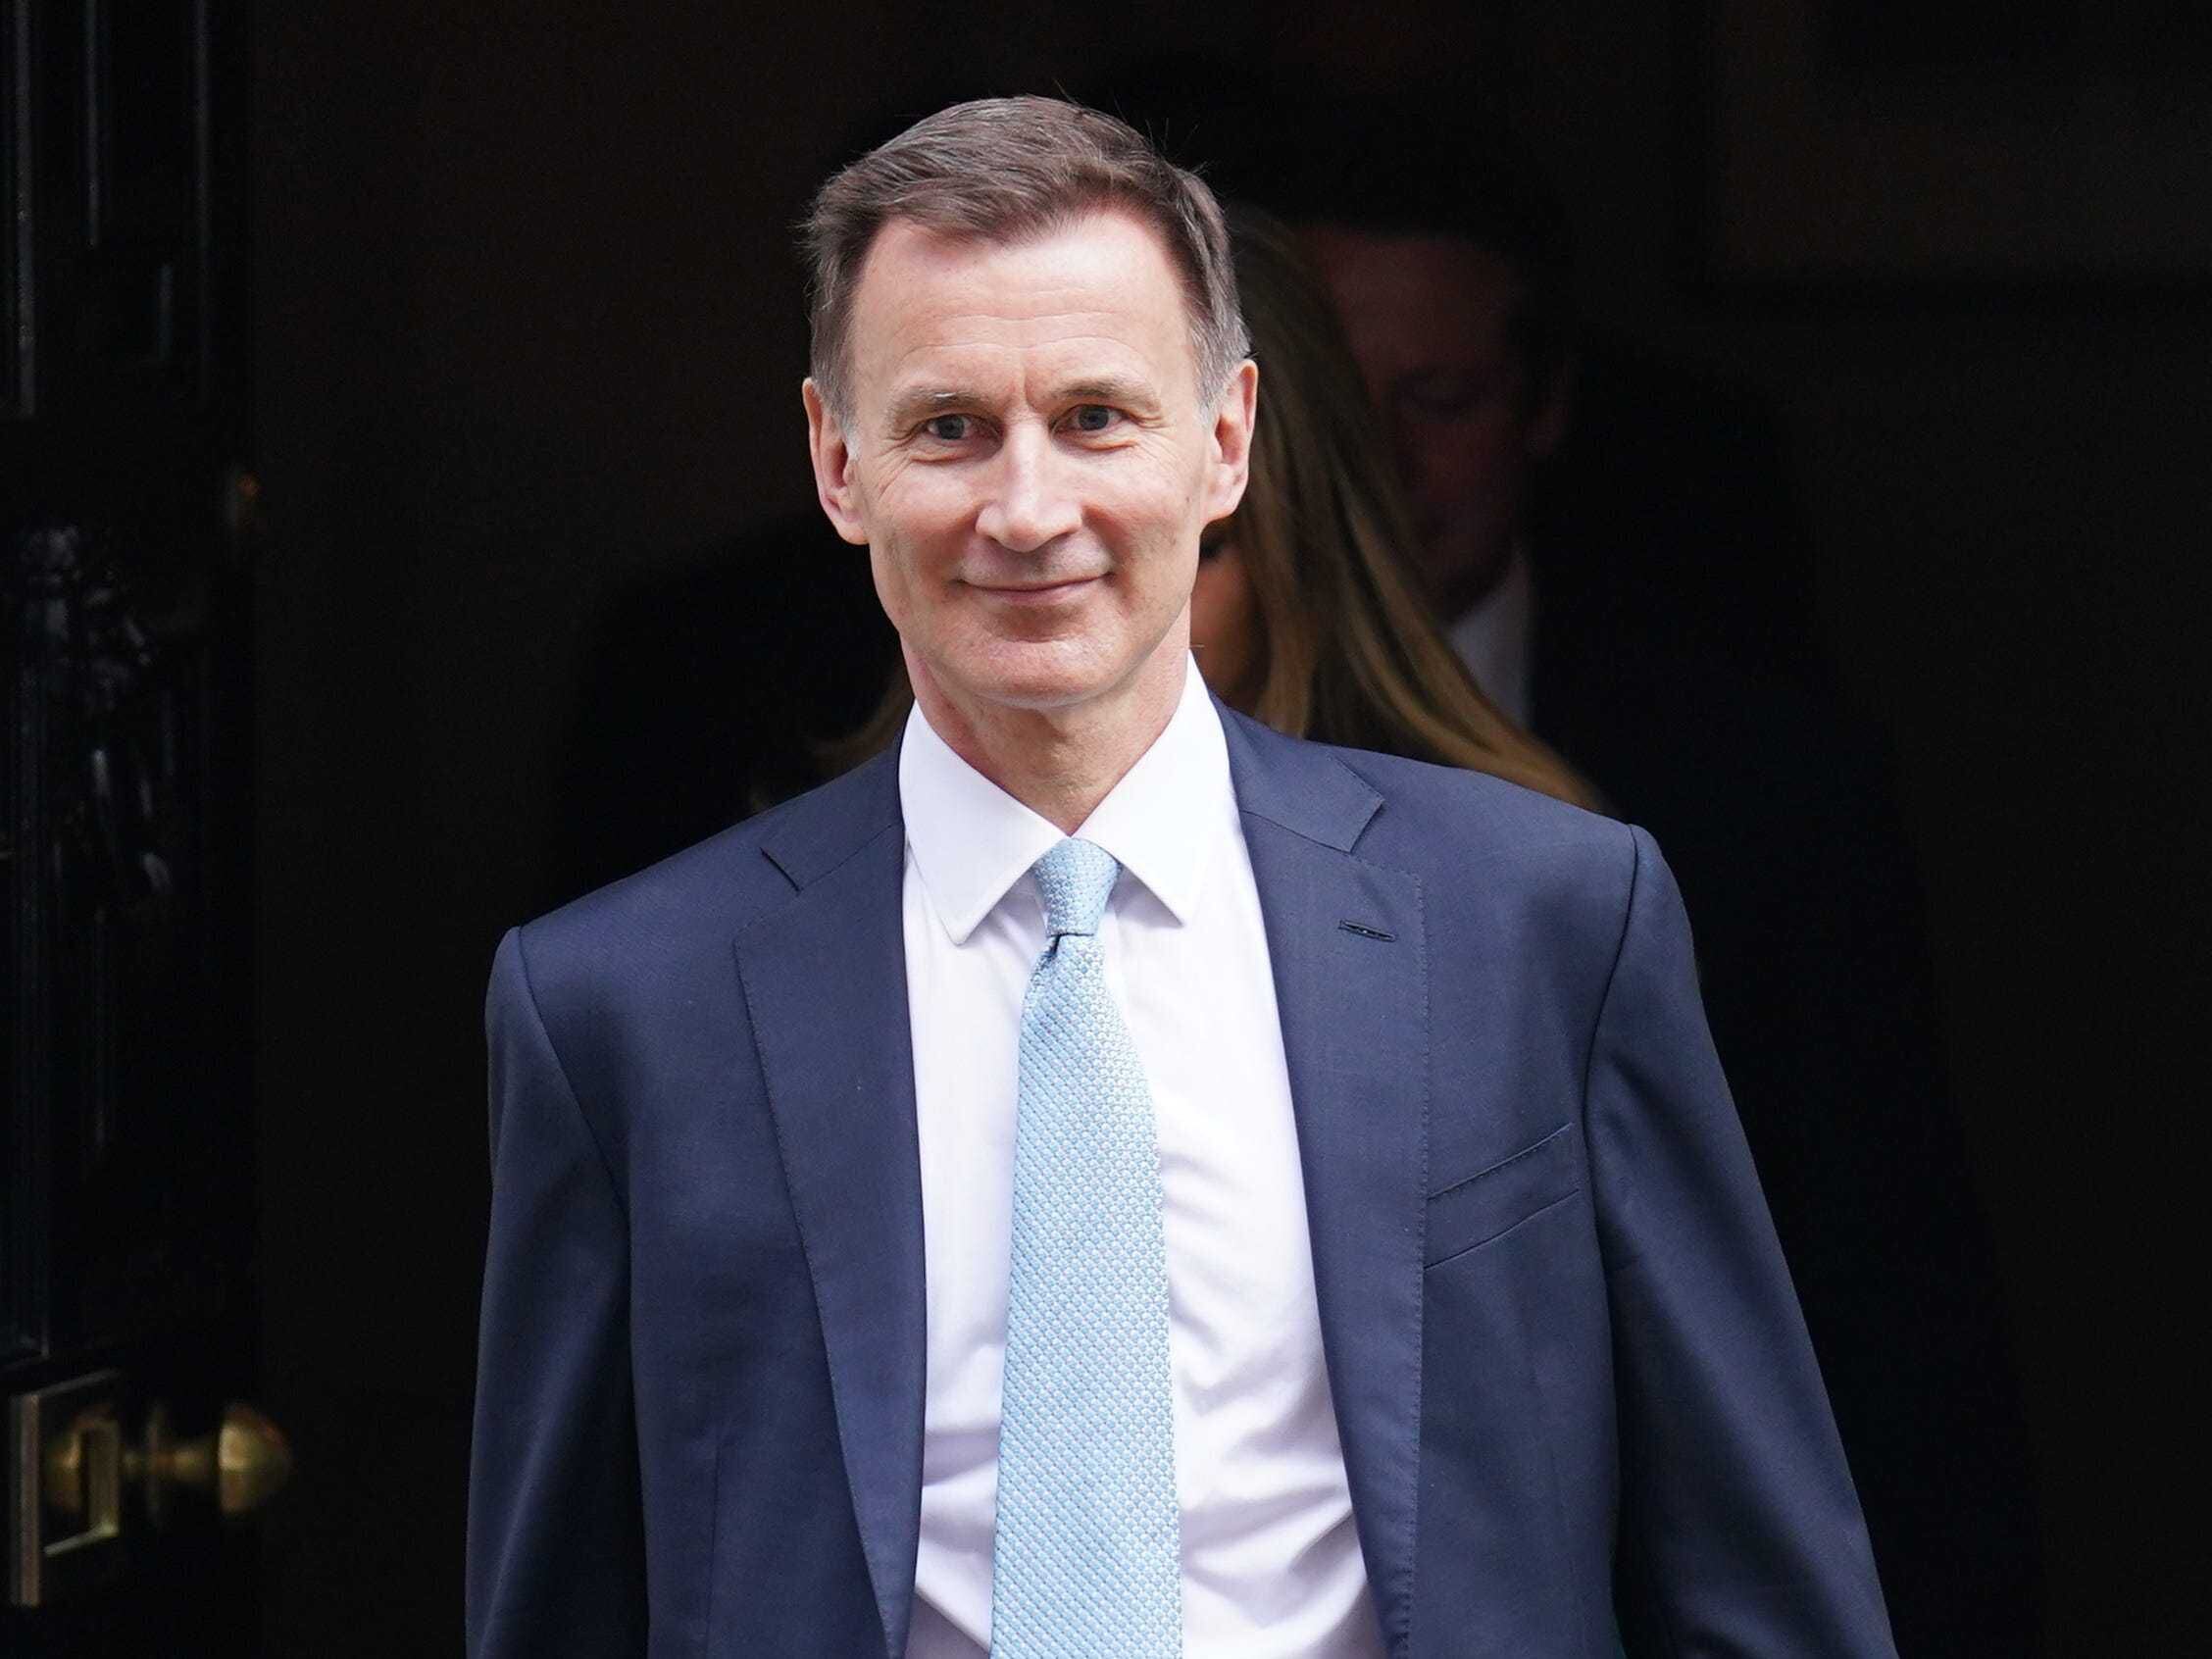 Hunt criticised by watchdog for misleading tax claims in Budget speech